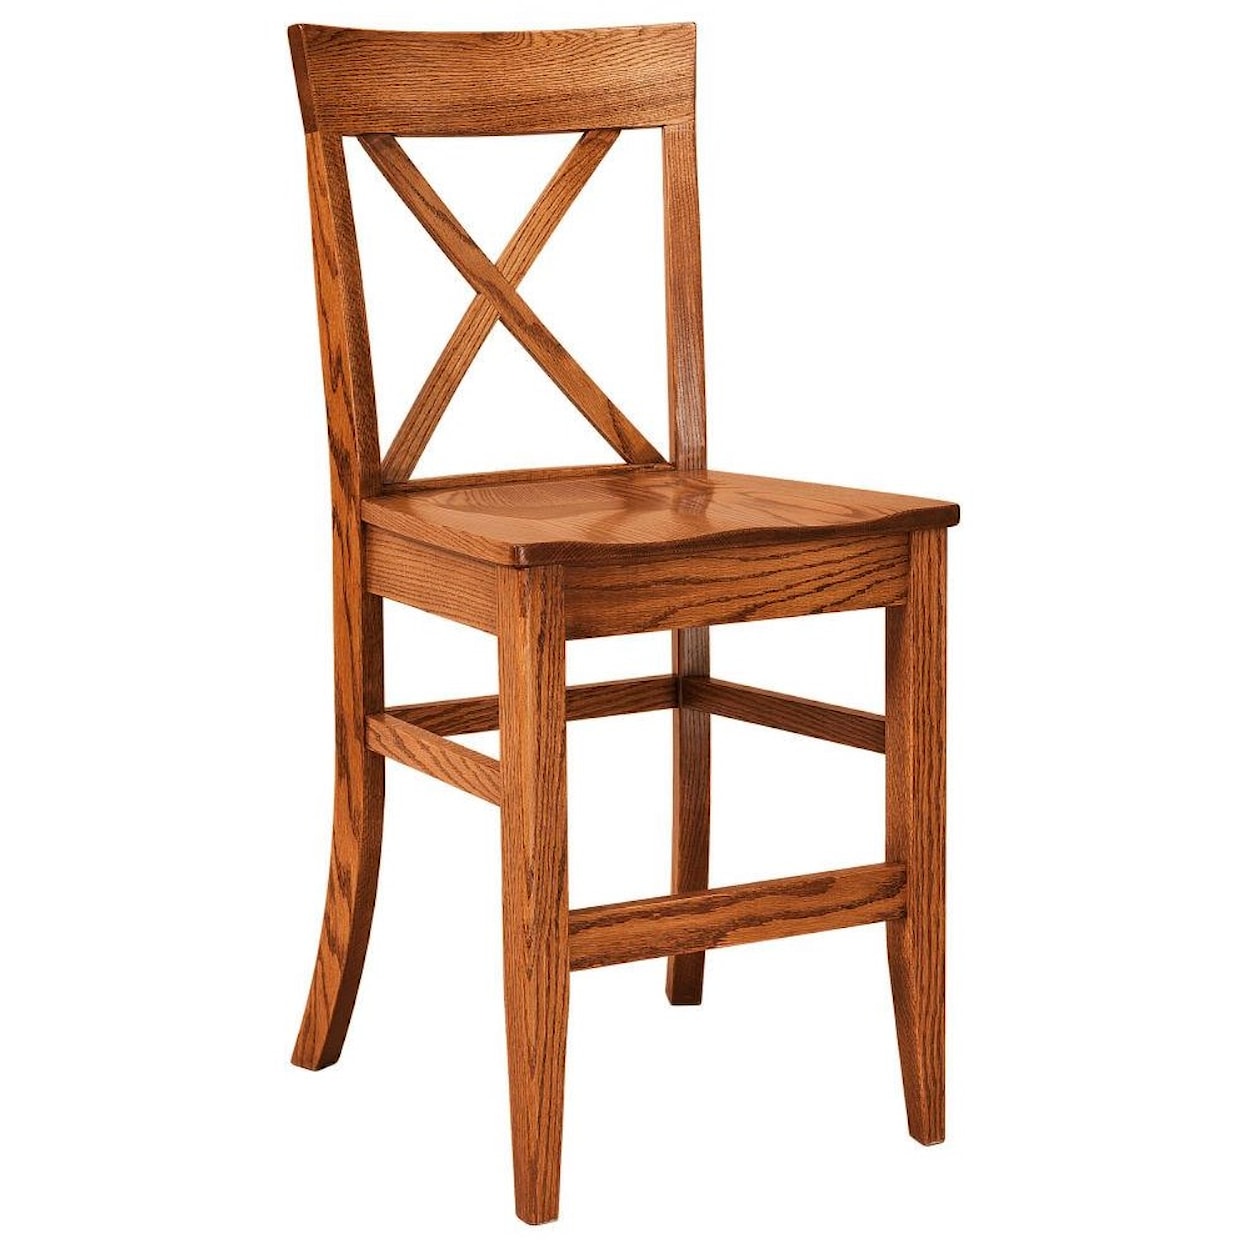 F&N Woodworking Frontier 24" Stationary Stool